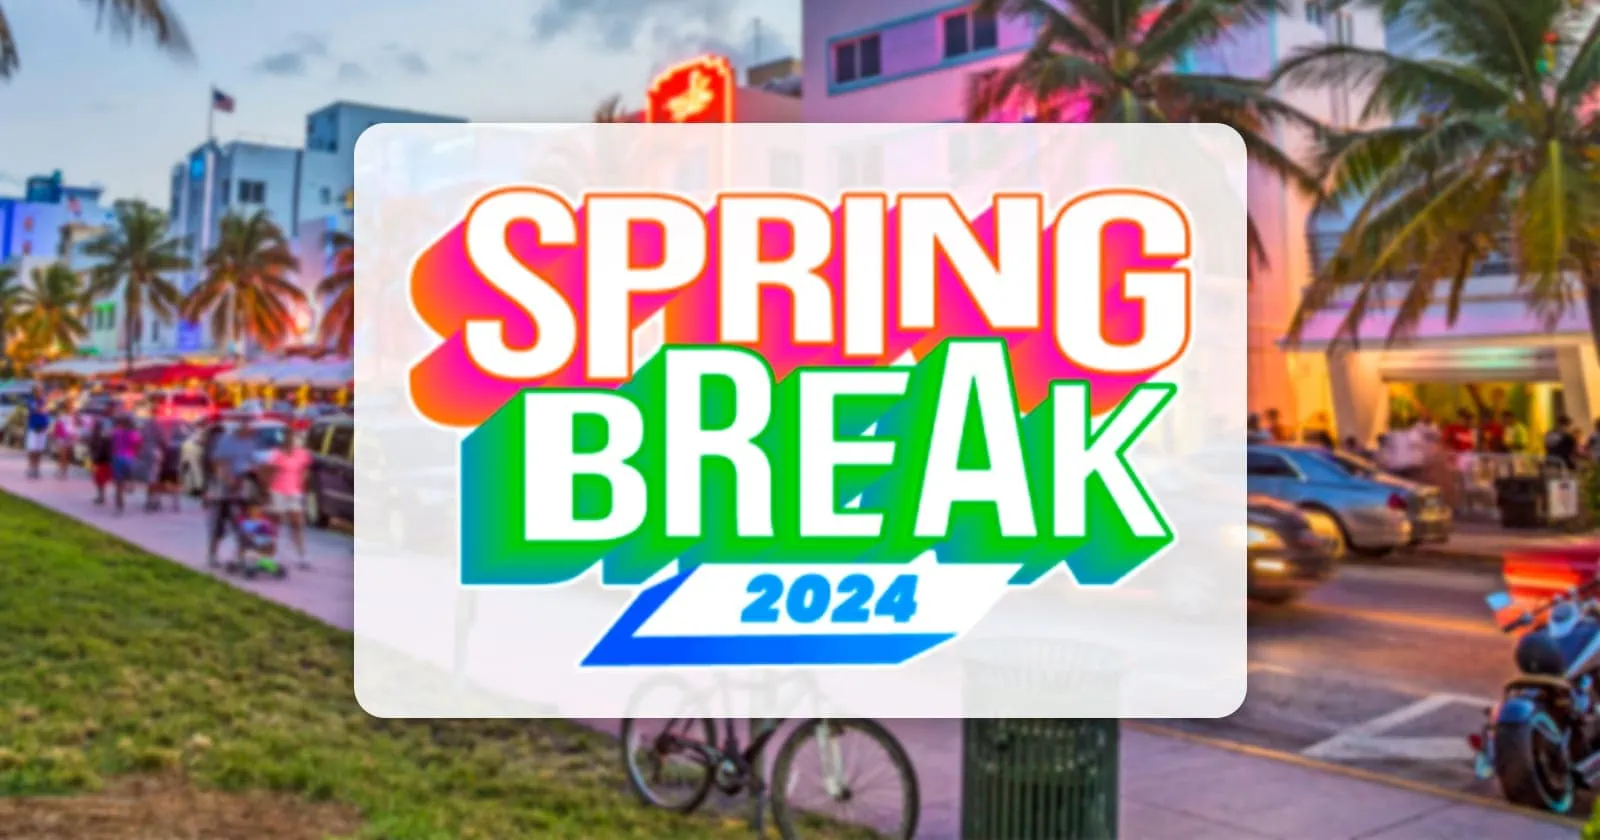 Ready for Spring Break 2024 in Miami Learn About the Restrictions Reported by the City Beforehand